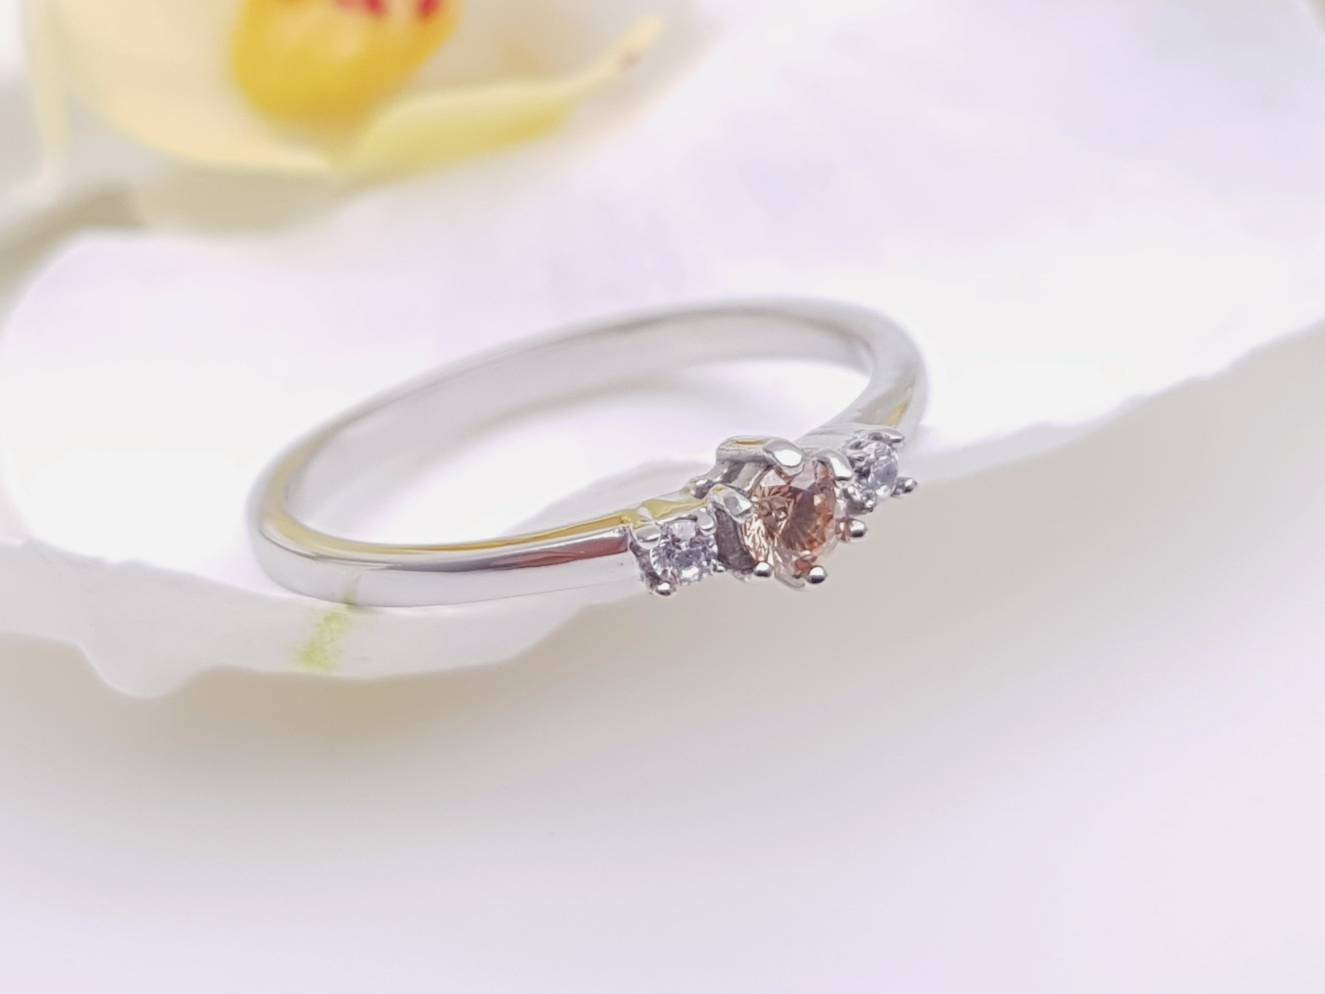 Natural Citrine and White Sapphire 3 stone Trilogy Ring in White Gold or Titanium  - engagement ring - handmade ring